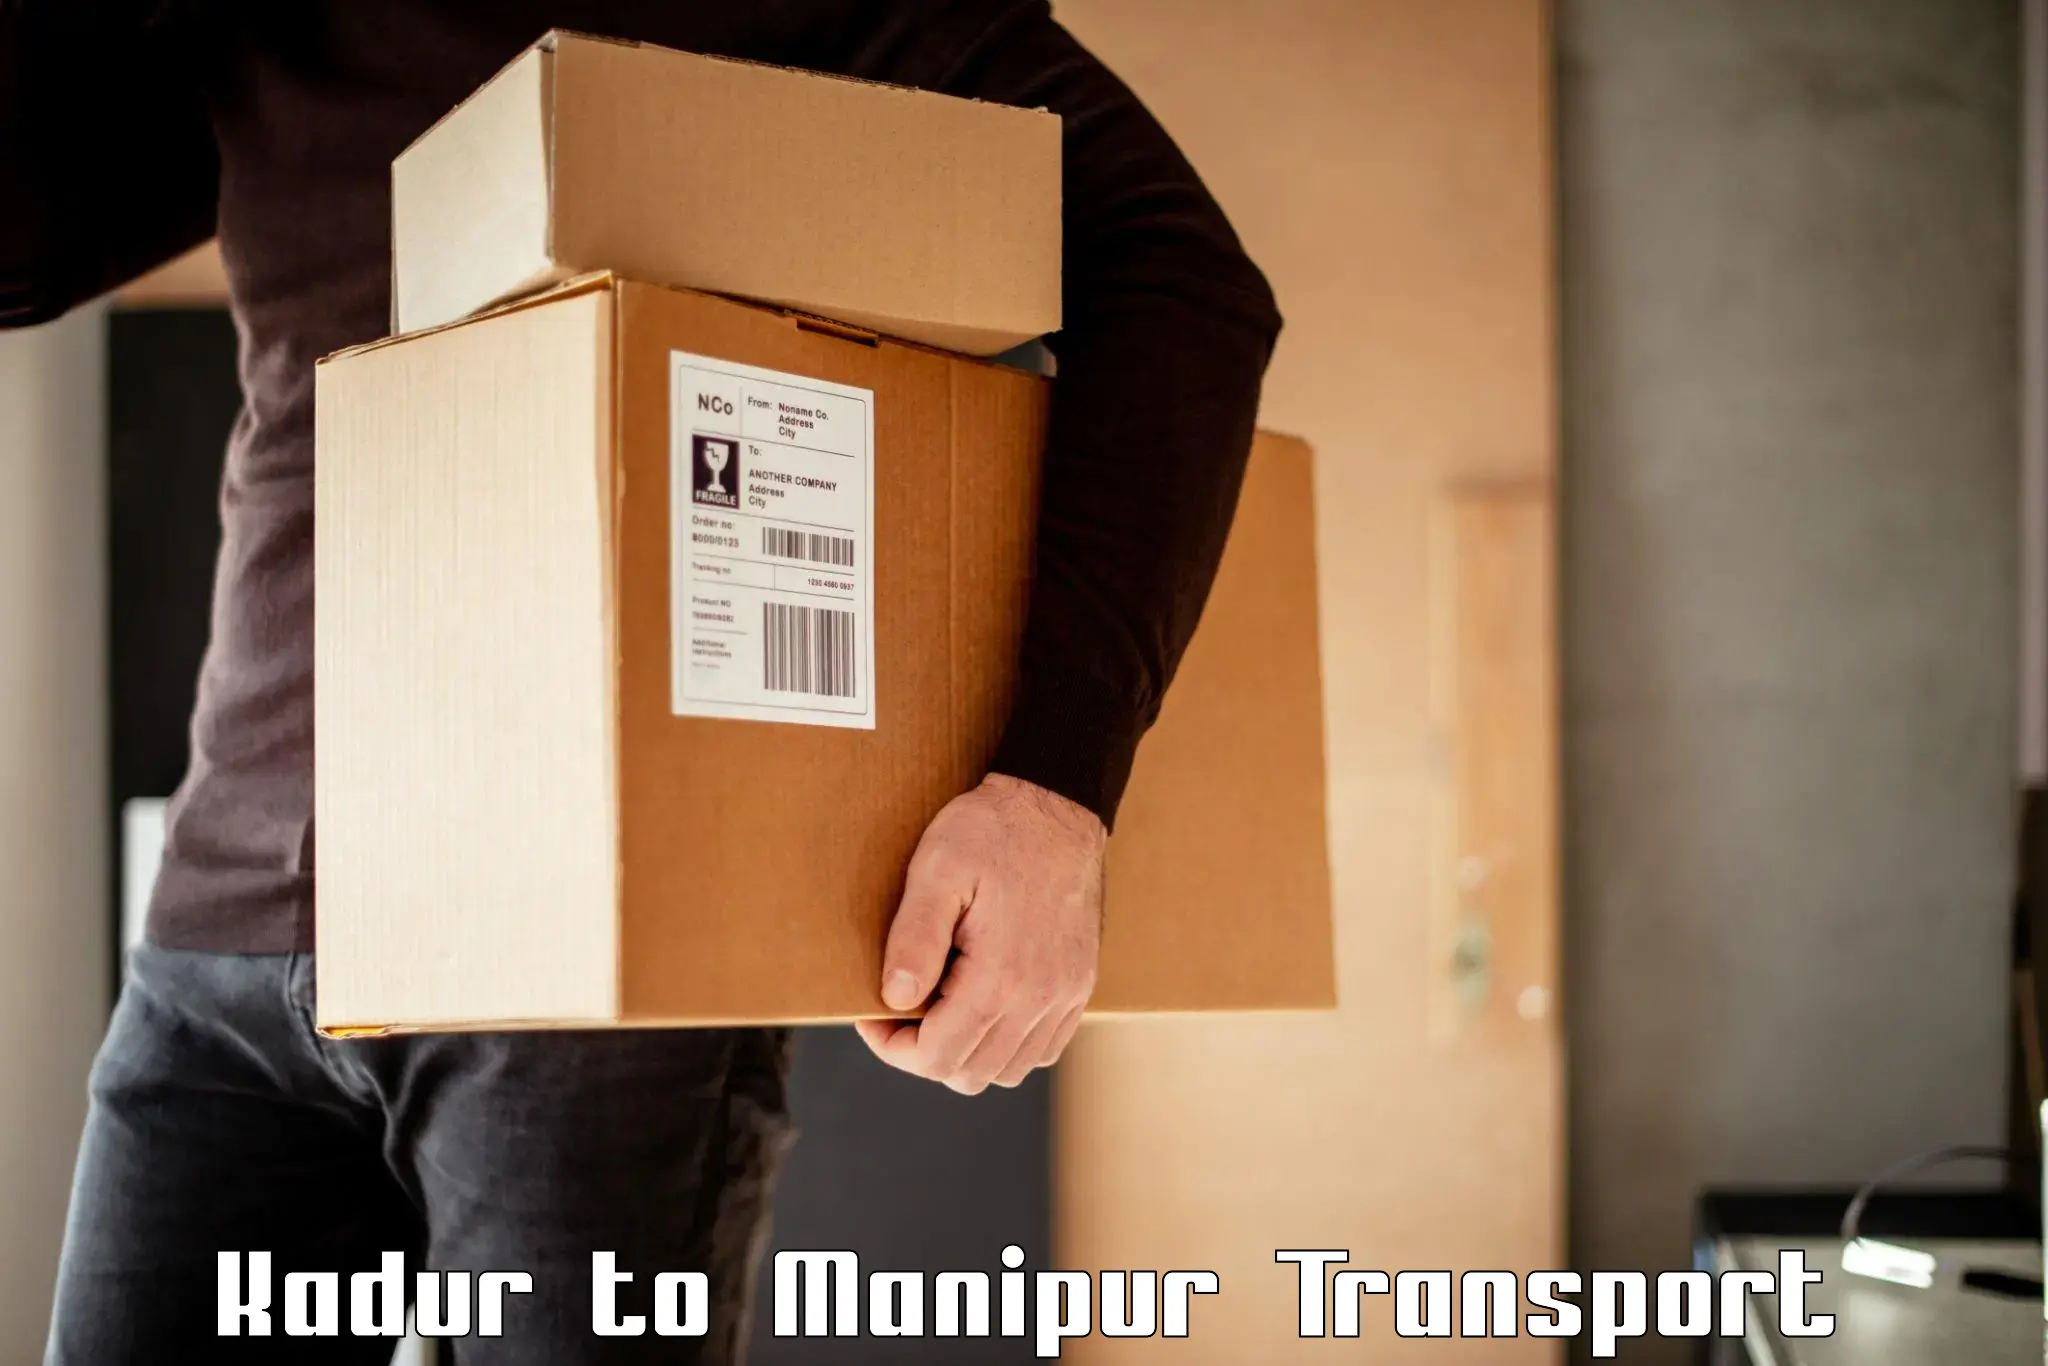 Commercial transport service Kadur to Manipur